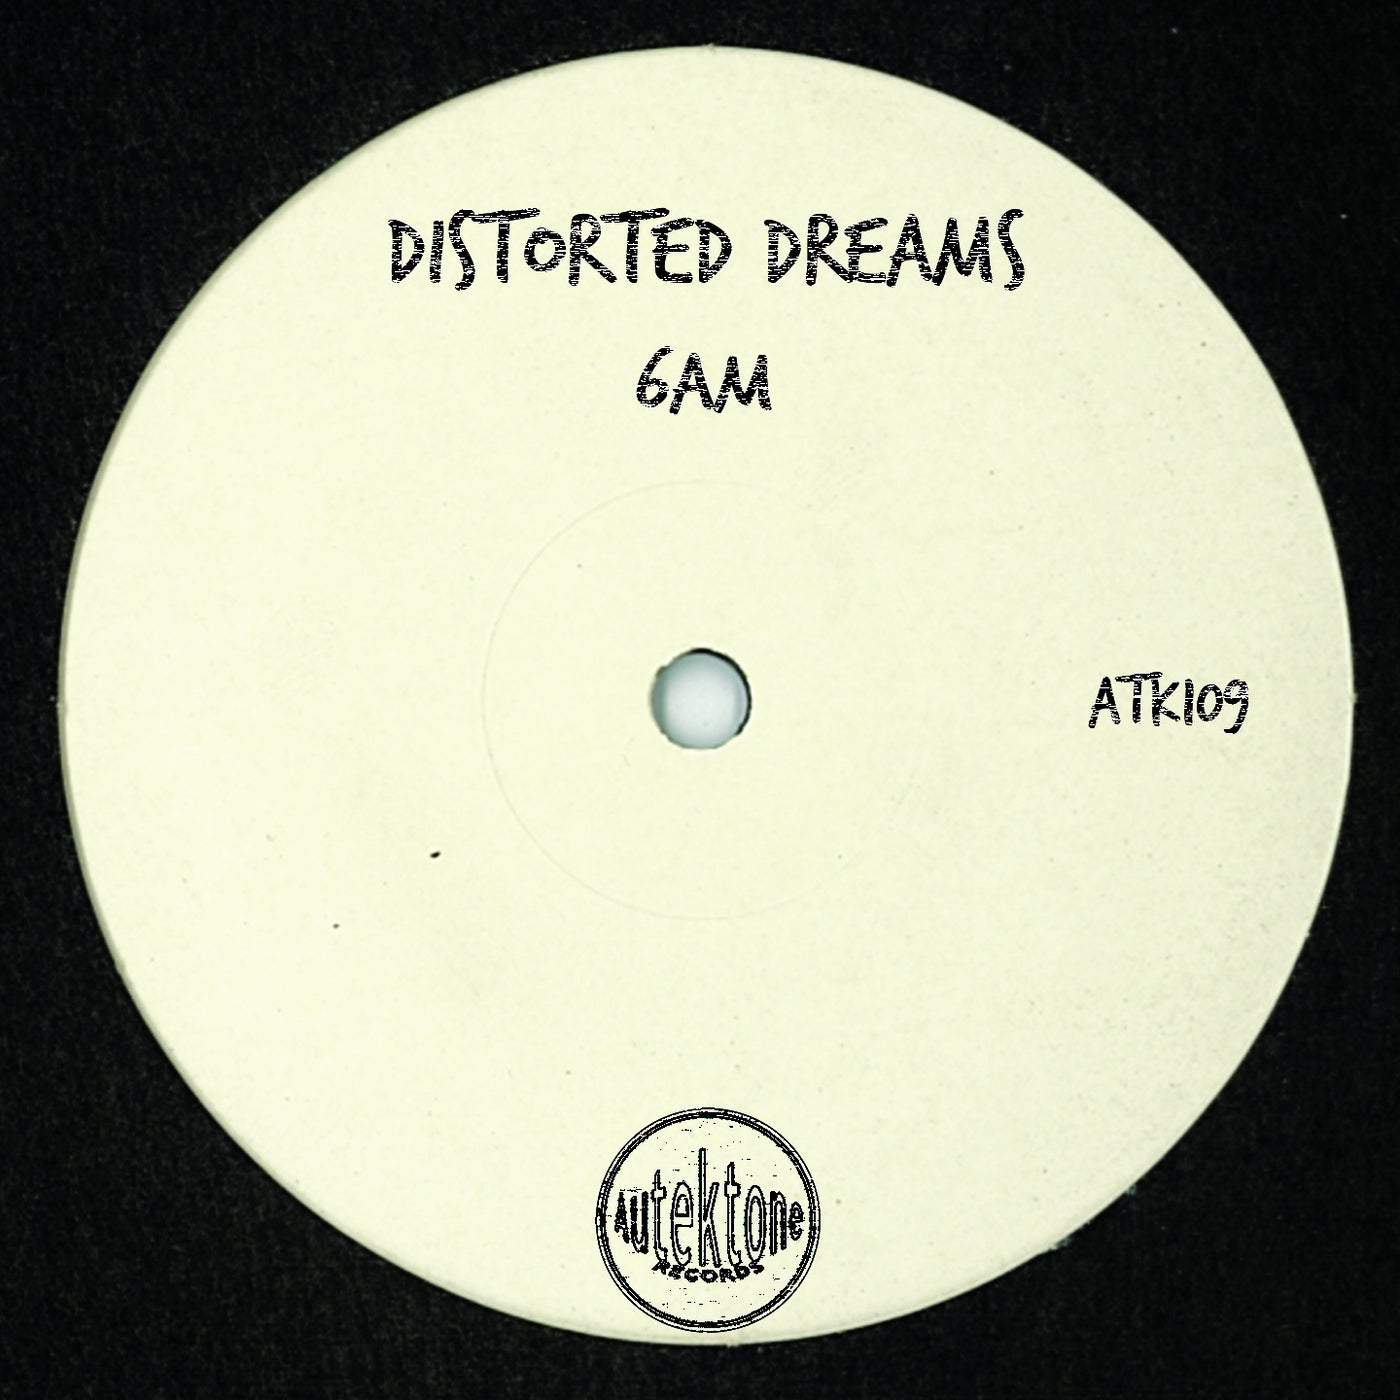 Download Distorted Dreams - 6am on Electrobuzz